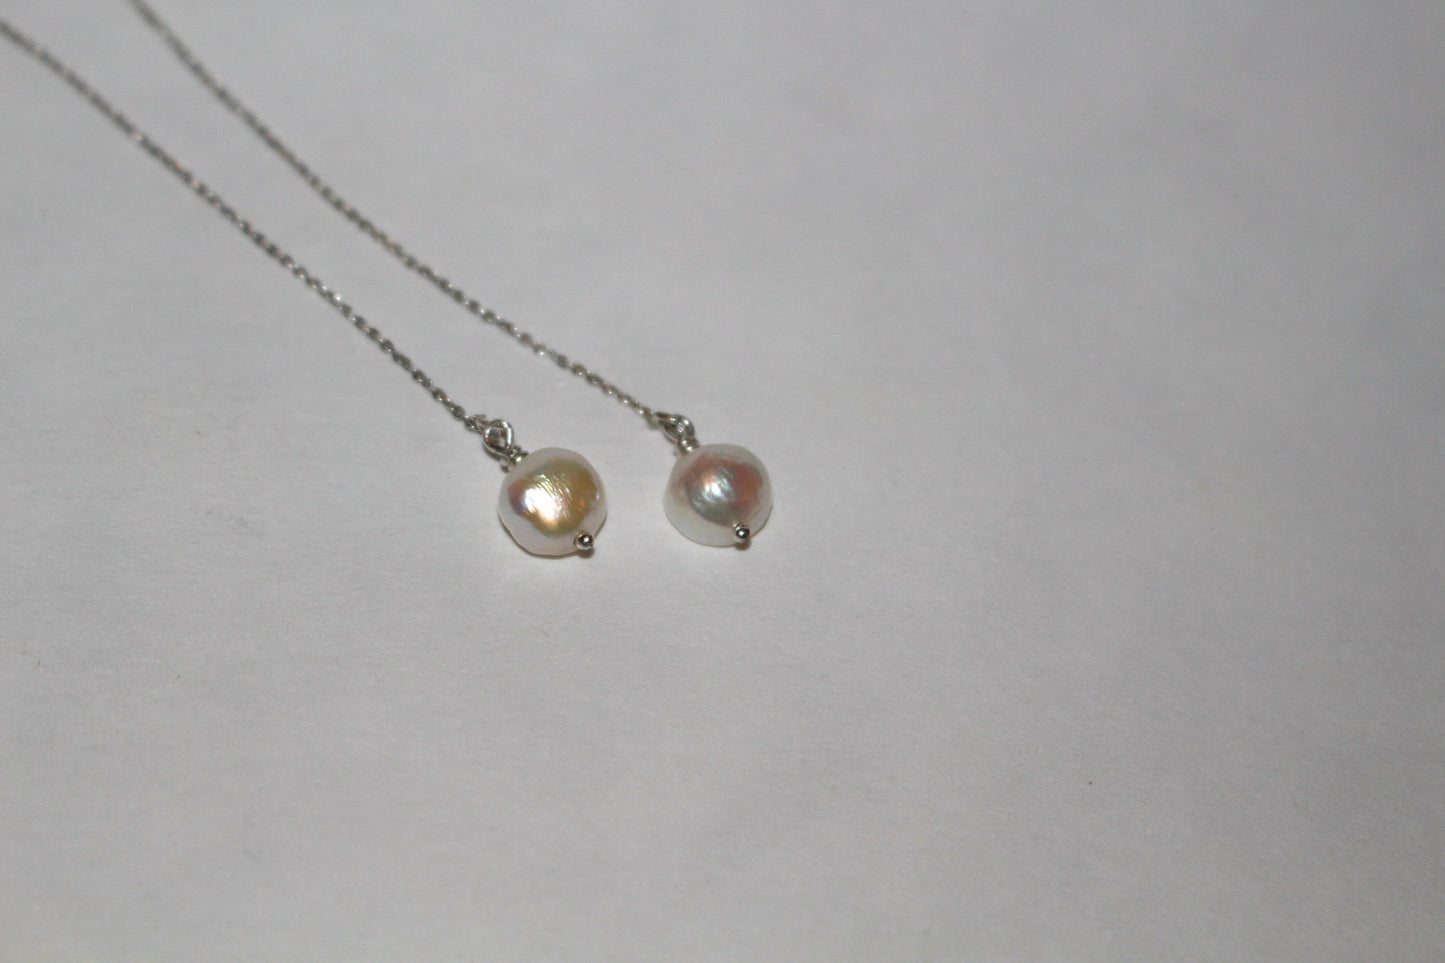 Pearl Drop Threader Earrings Available in Sterling Silver and 14K Gold-Fill